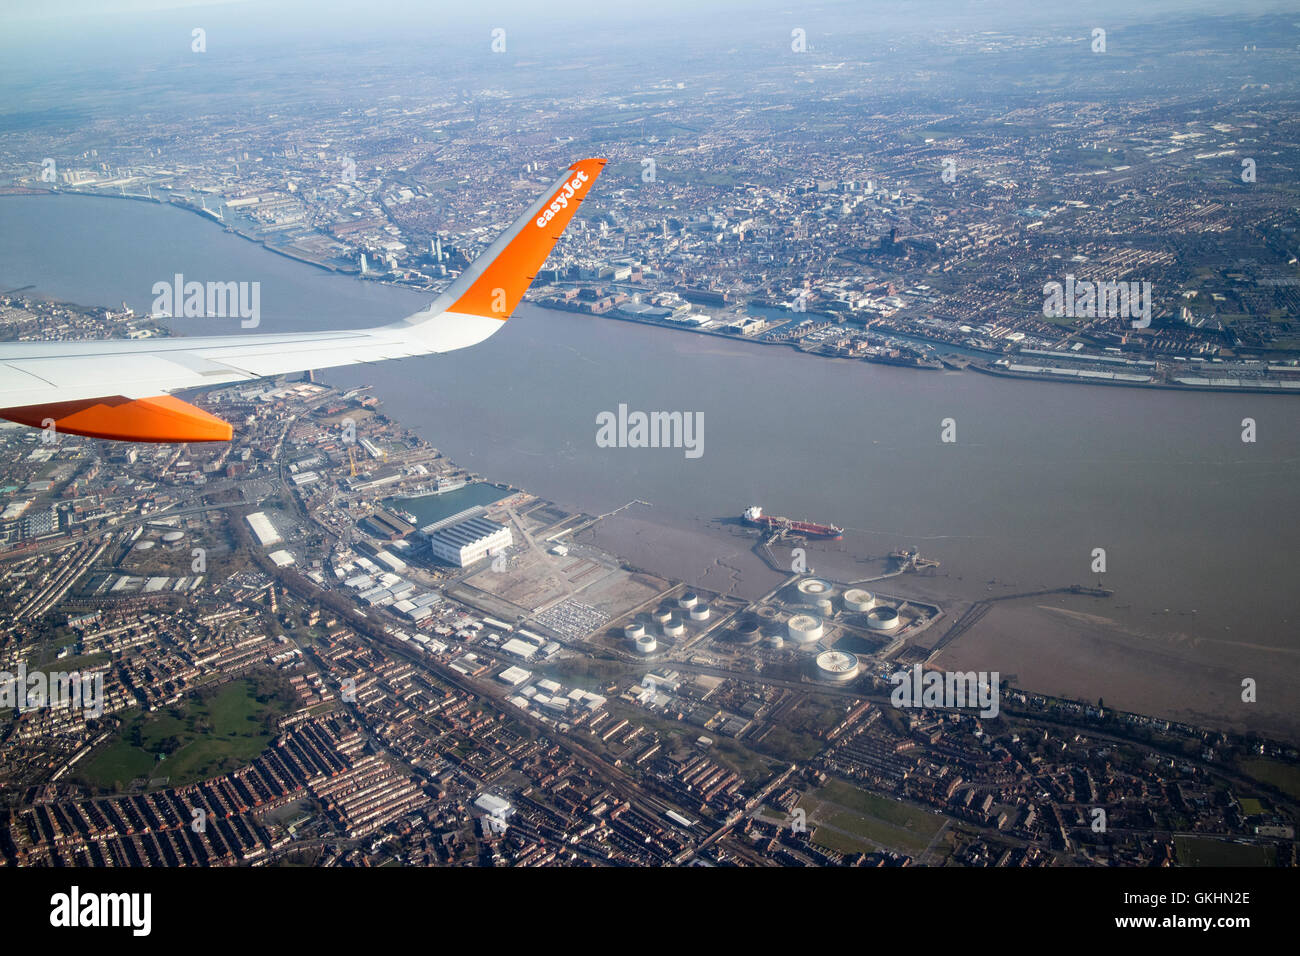 aerial view of easyjet aircraft flying over birkenhead docks, Liverpool and the river Mersey Stock Photo